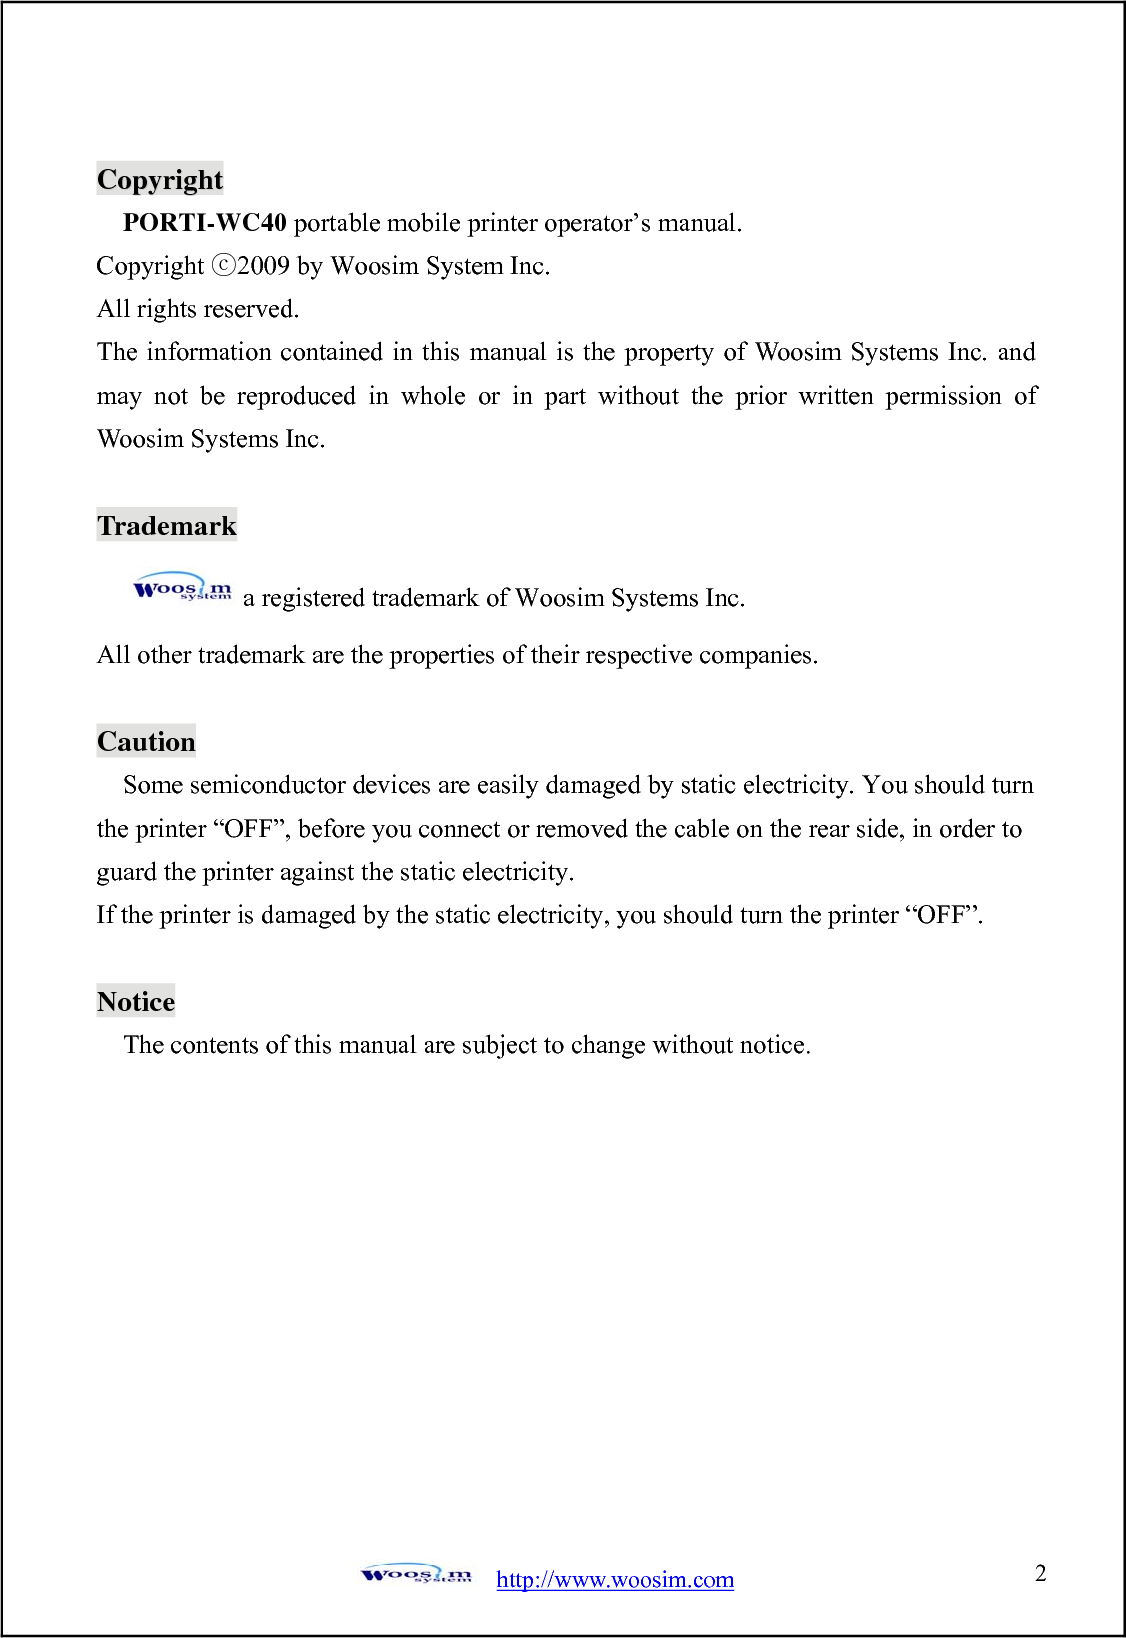  http://www.woosim.com 2                               CCooppyyrriigghhtt  PORTI-WC40 portable mobile printer operator’s manual. Copyright 200ⓒ9 by Woosim System Inc. All rights reserved. The information contained in this manual is the property of Woosim Systems Inc. and may not be reproduced in whole or in part without the prior written permission of Woosim Systems Inc.  Trademark a registered trademark of Woosim Systems Inc. All other trademark are the properties of their respective companies.  Caution Some semiconductor devices are easily damaged by static electricity. You should turn the printer “OFF”, before you connect or removed the cable on the rear side, in order to guard the printer against the static electricity.   If the printer is damaged by the static electricity, you should turn the printer “OFF”.  Notice The contents of this manual are subject to change without notice.  